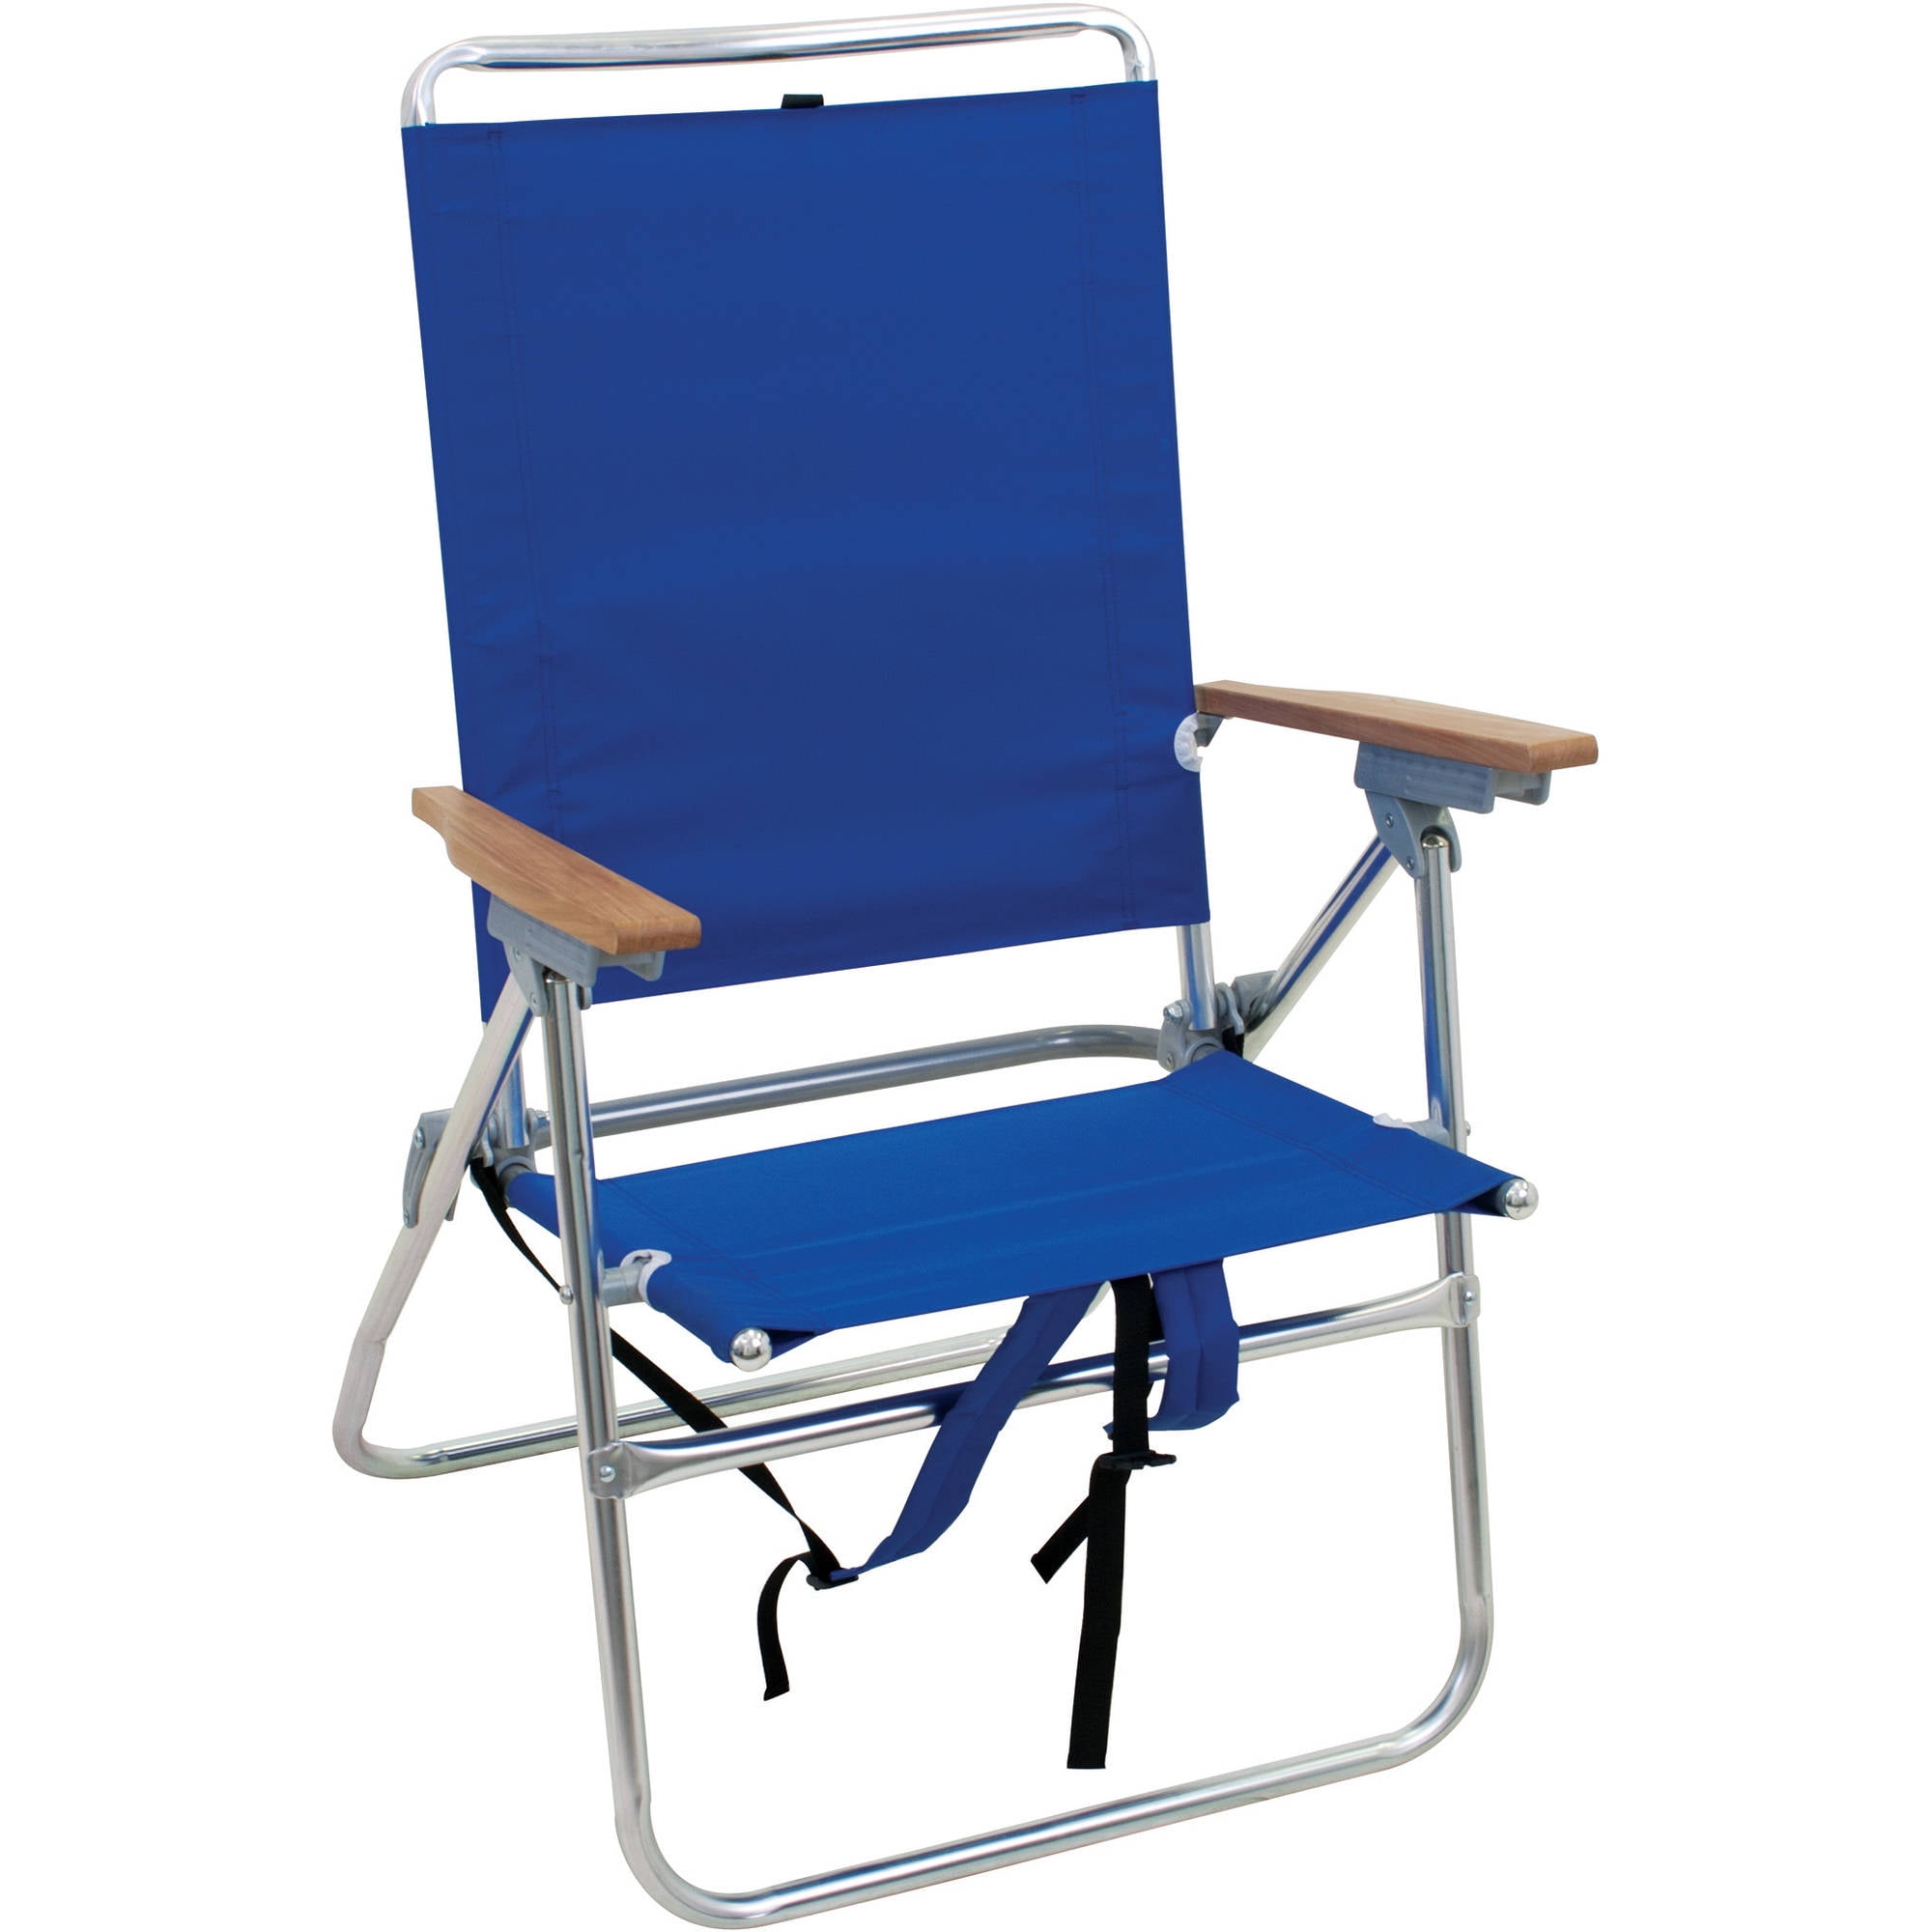 Minimalist Beach Lounge Chair With Backpack Straps for Large Space